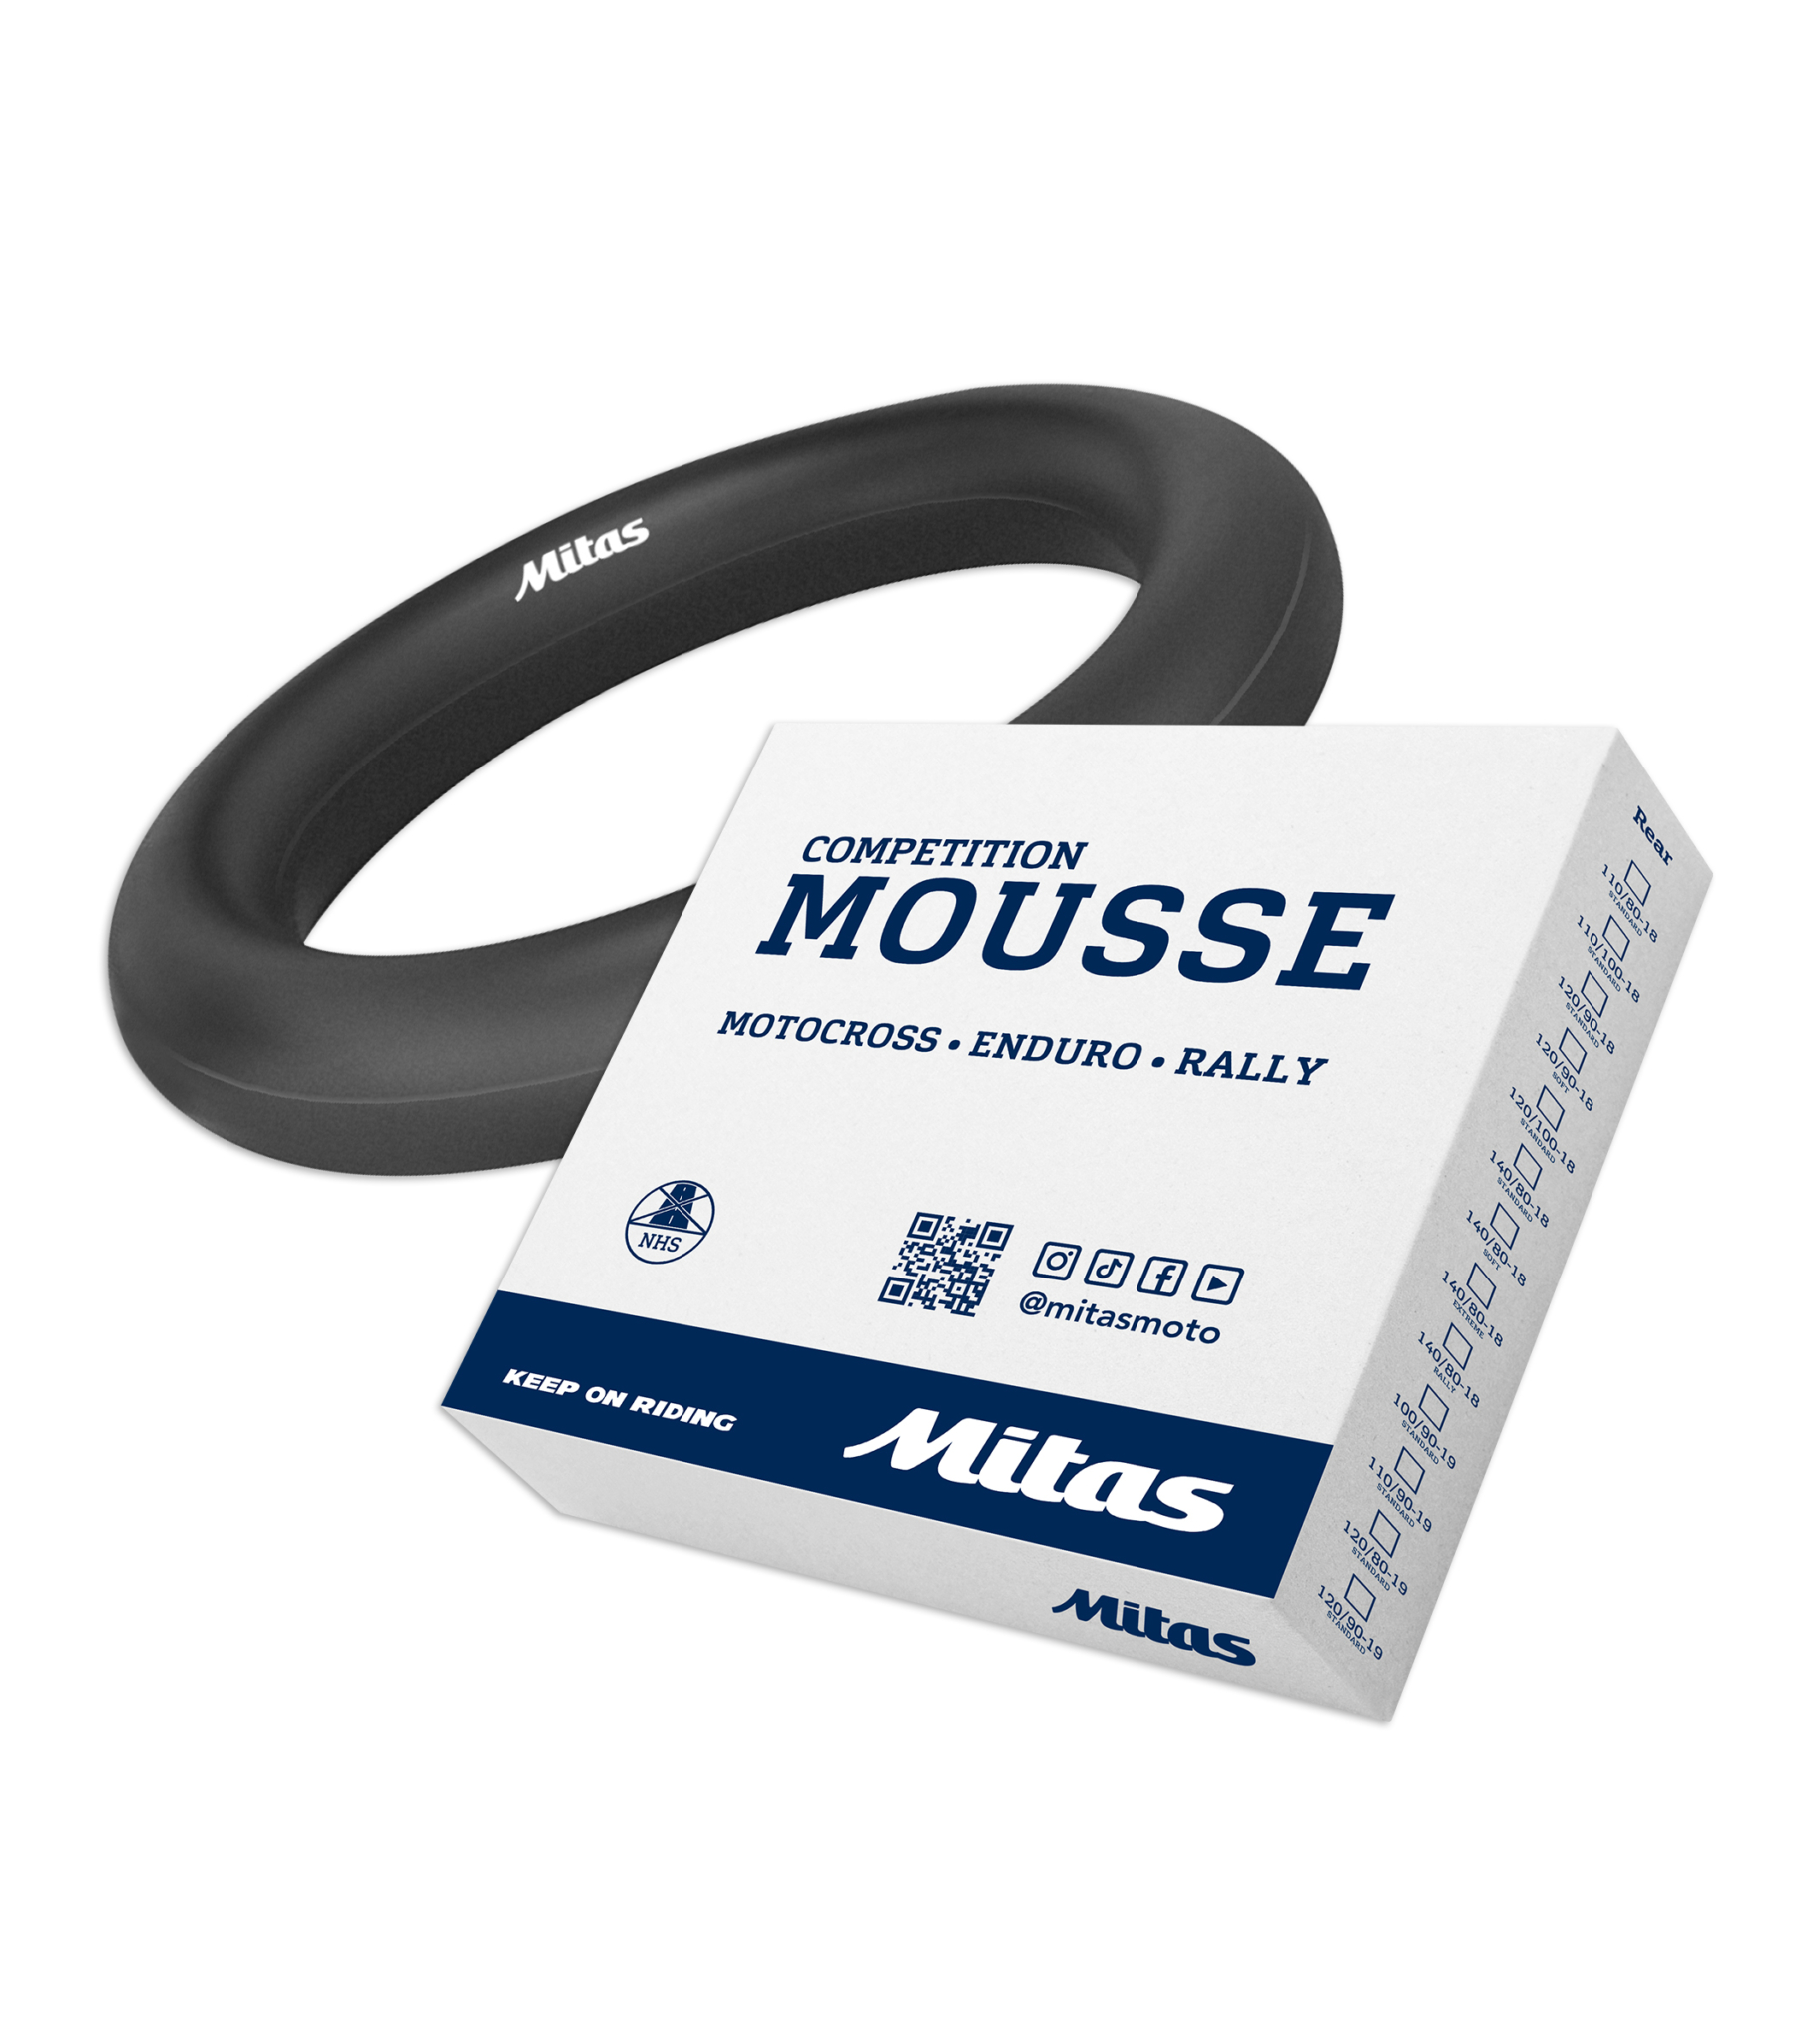 Mitas extends its mousse range with a new rally version